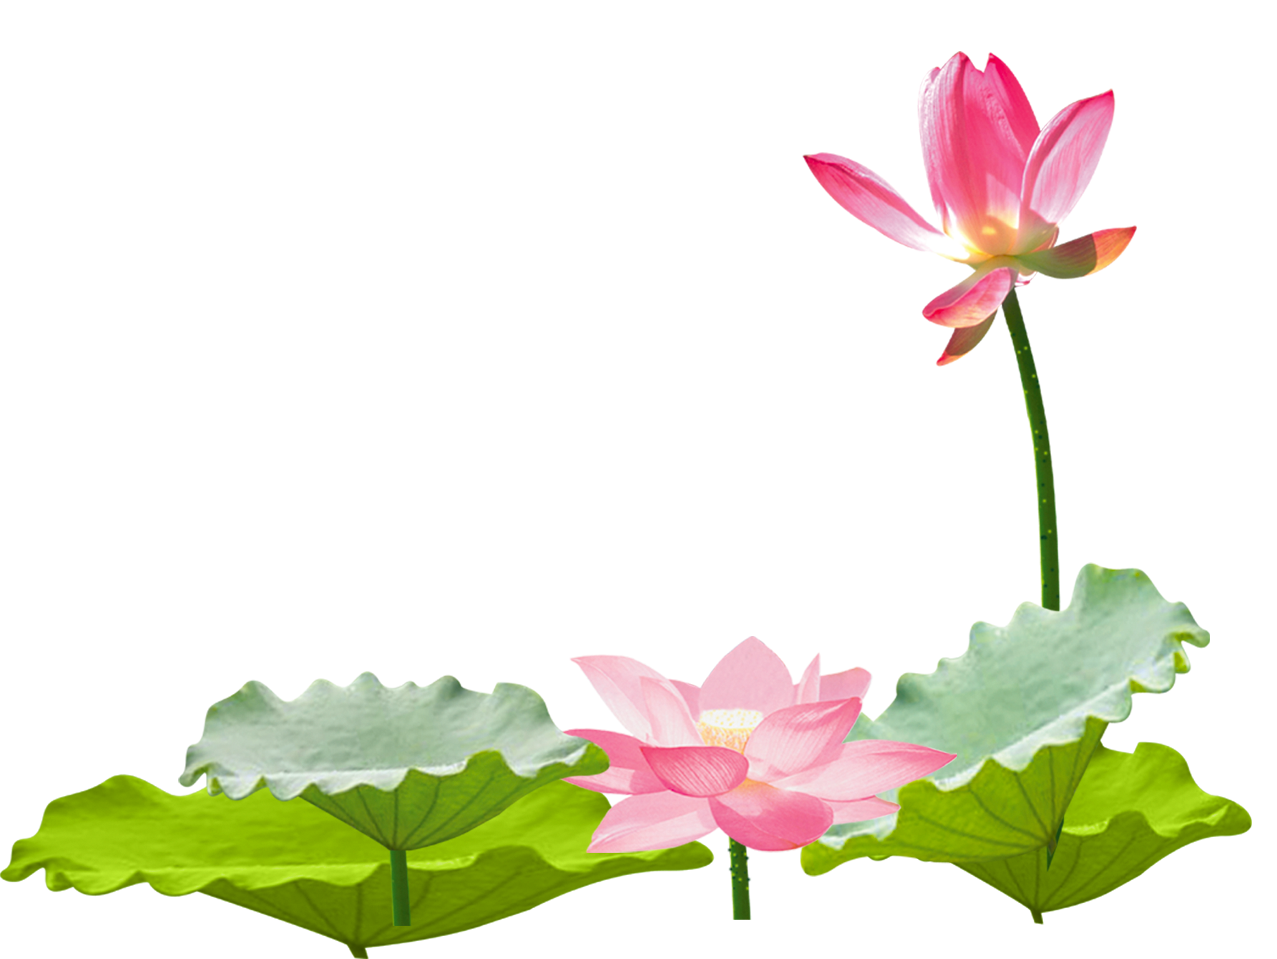 Lotus clipart lotus chinese. Flower asian ftestickers